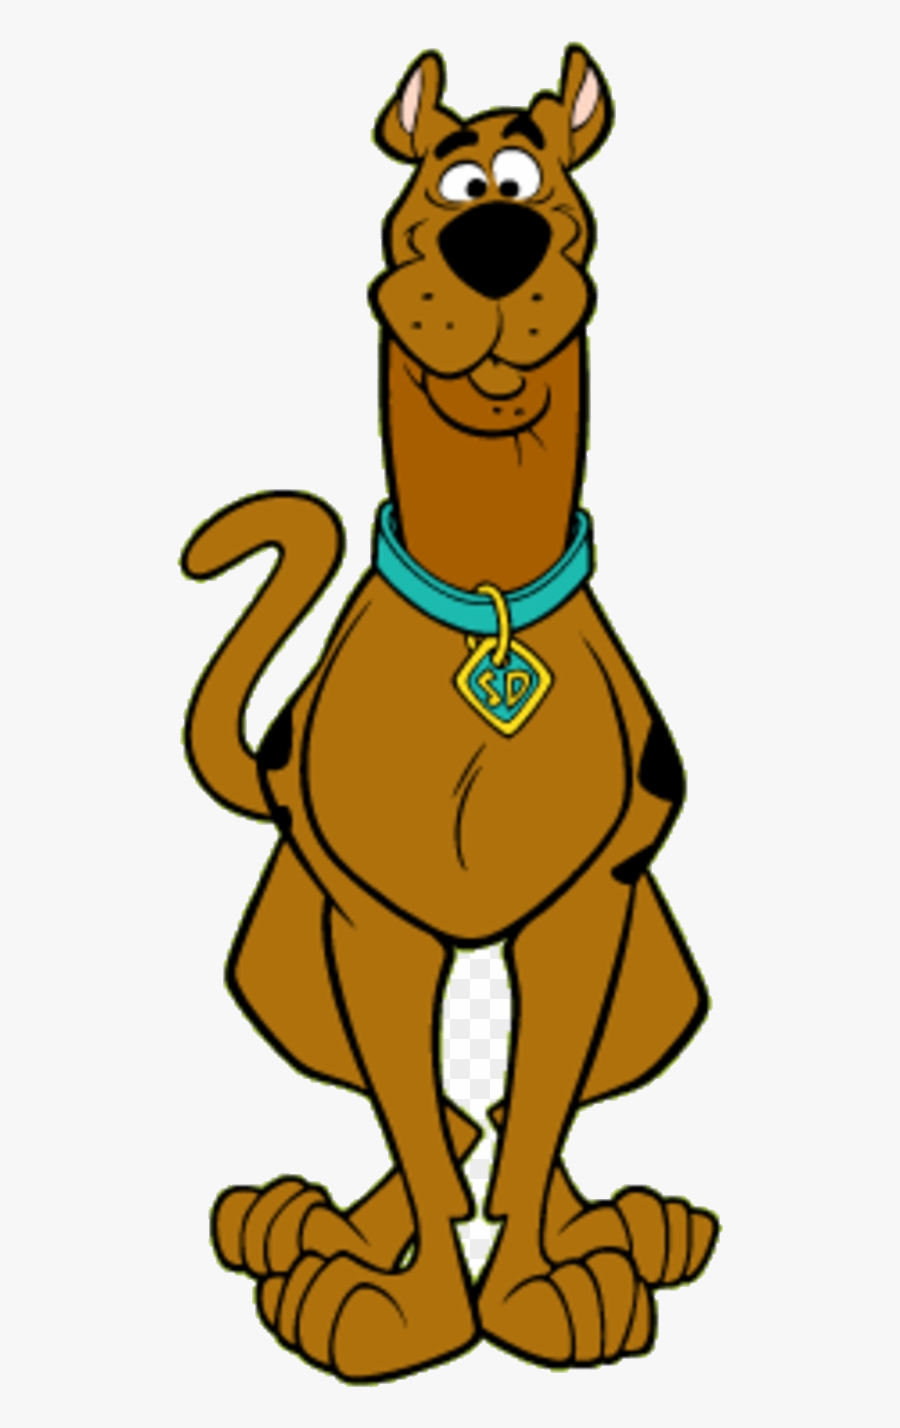 Scooby Doo Characters Google Search Clipart Transparent - Scooby Doo, Transparent Clipart